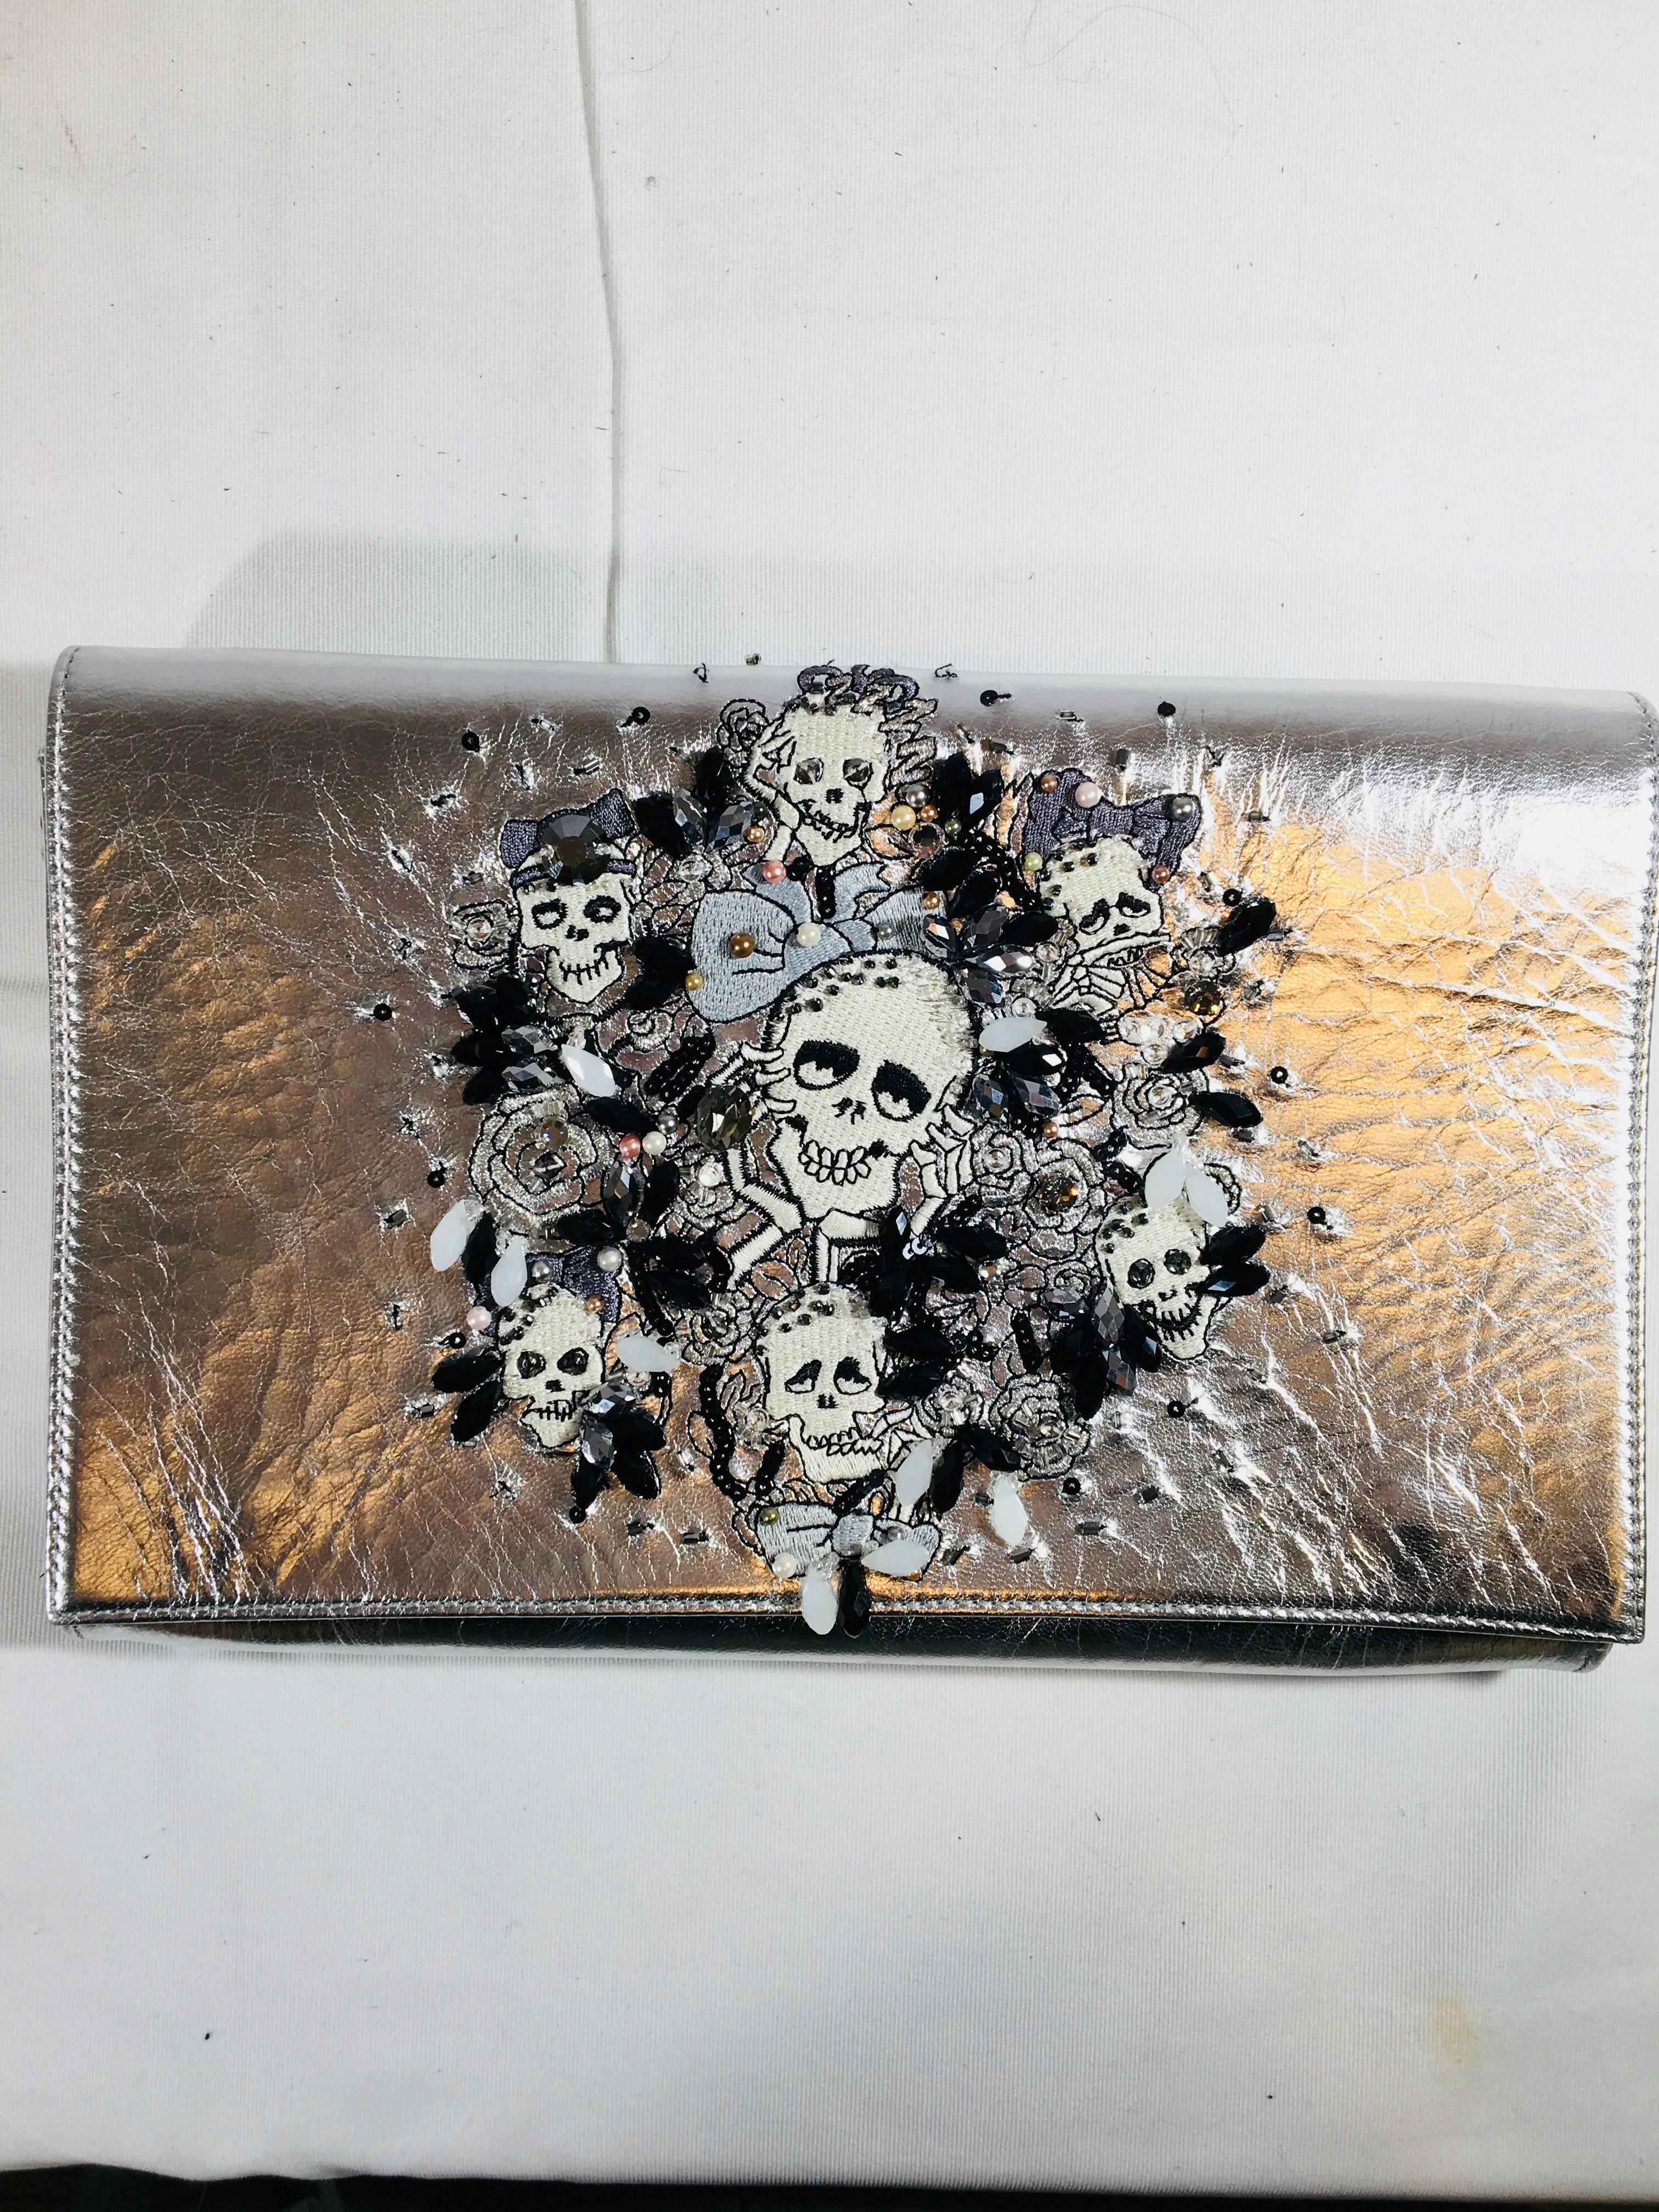 Preciously Paris Skull Shoulder Bag.
Silver Skull and Rose Embroidered Bag with Crystal and Bead Details. Flap Button Closure with Removable Silver Chain Strap.